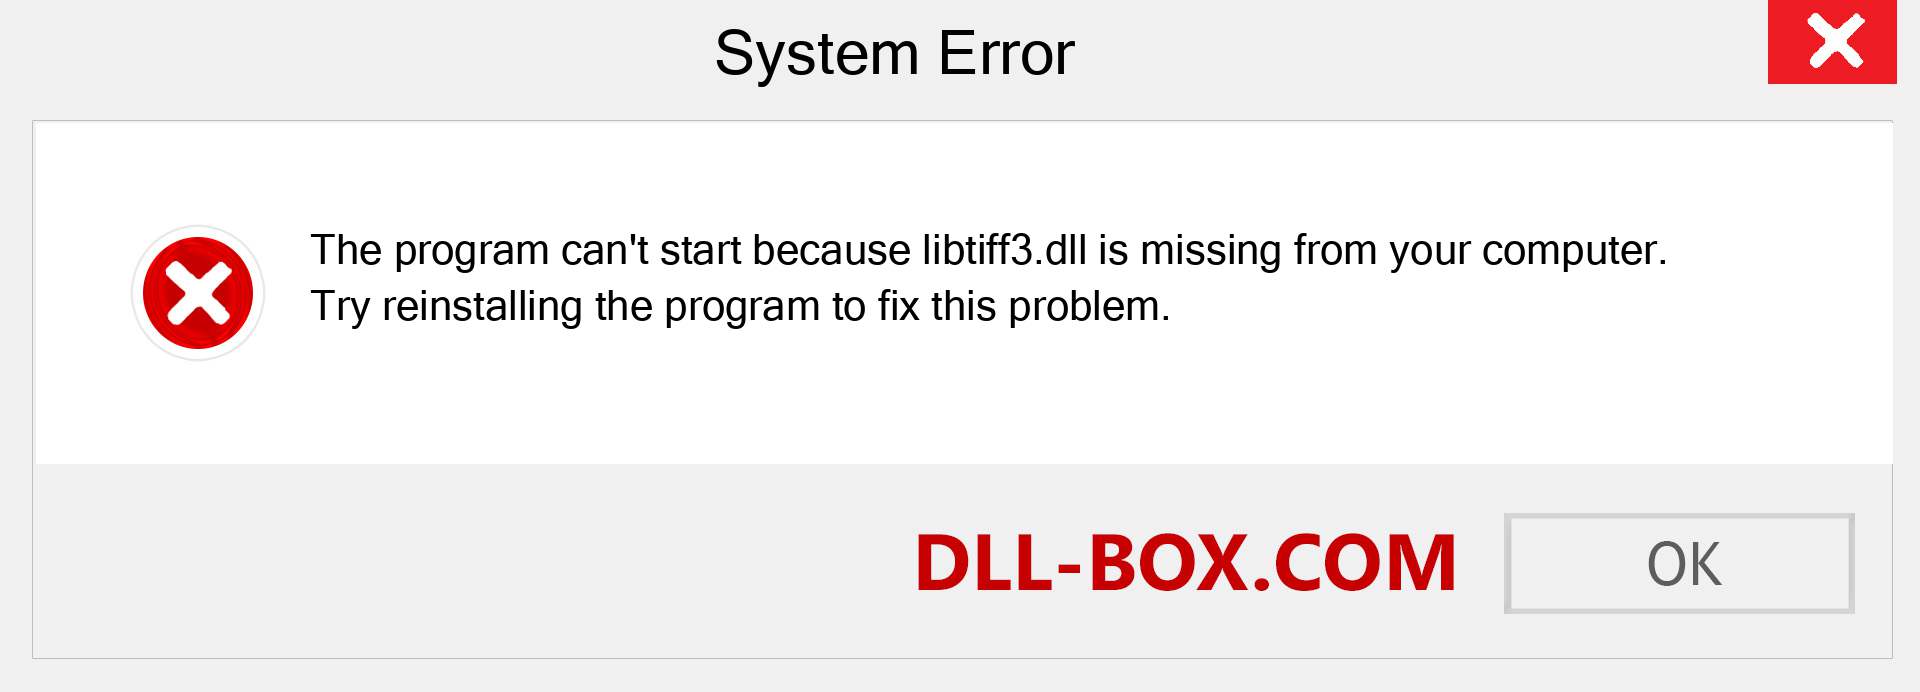  libtiff3.dll file is missing?. Download for Windows 7, 8, 10 - Fix  libtiff3 dll Missing Error on Windows, photos, images